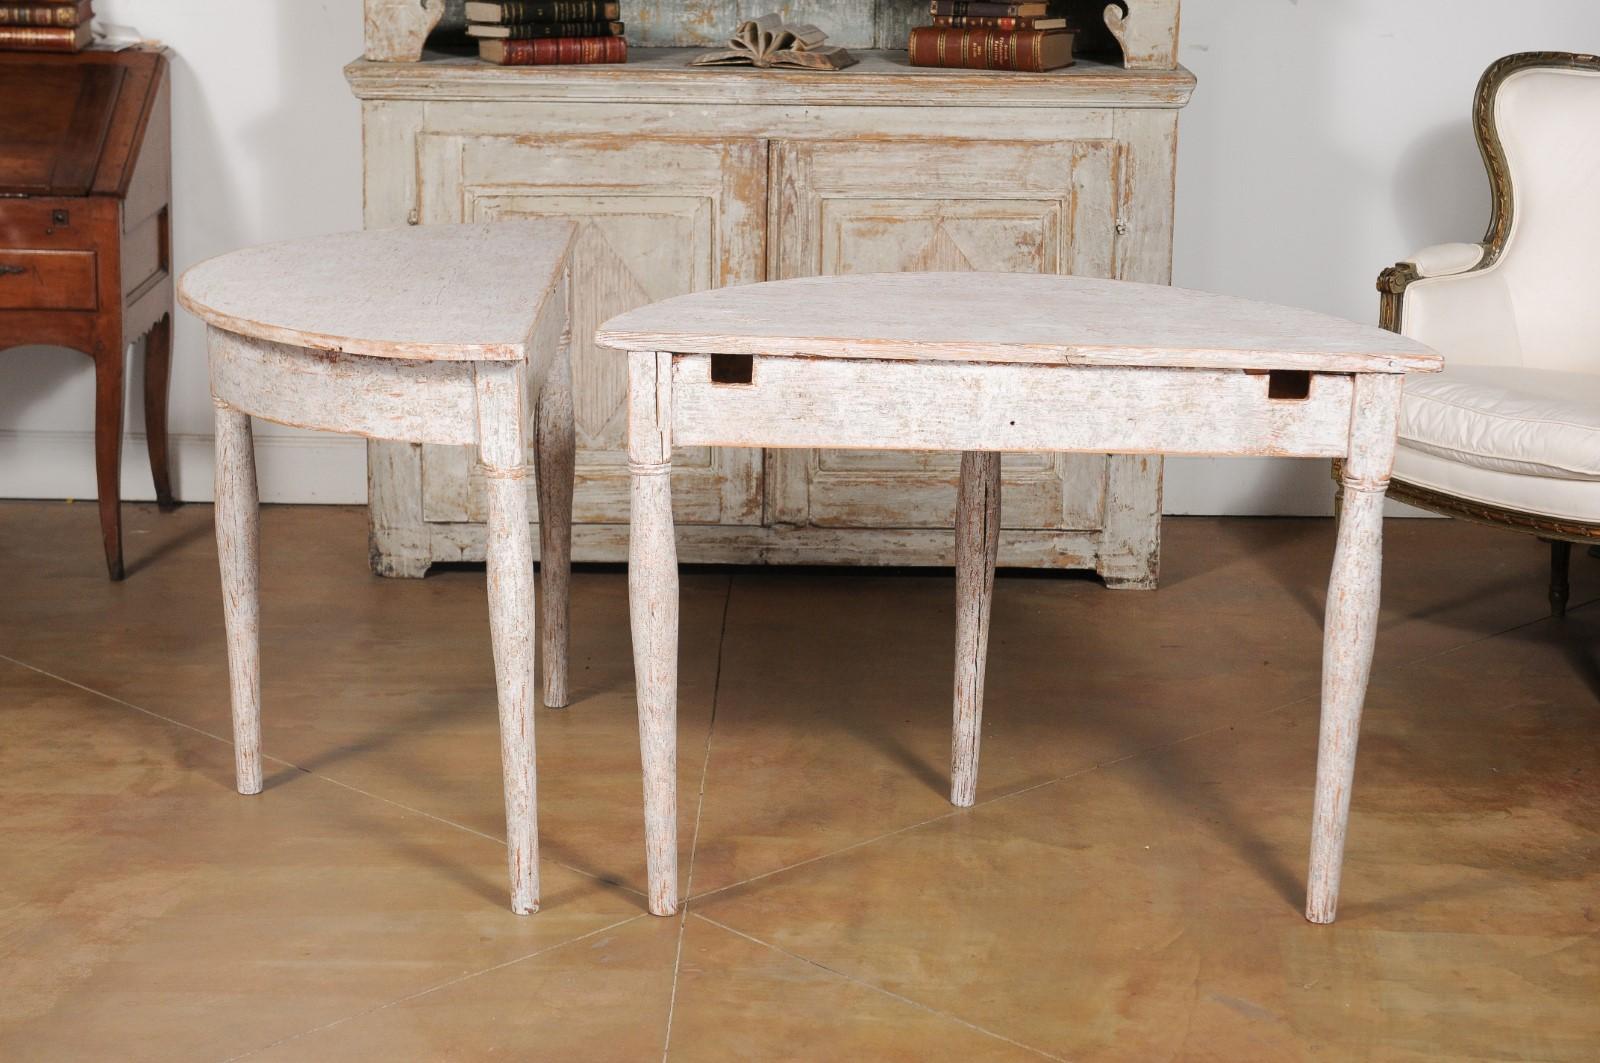 Pair of 1840s Swedish Painted Wood Demilune Tables with Distressed Finish 5